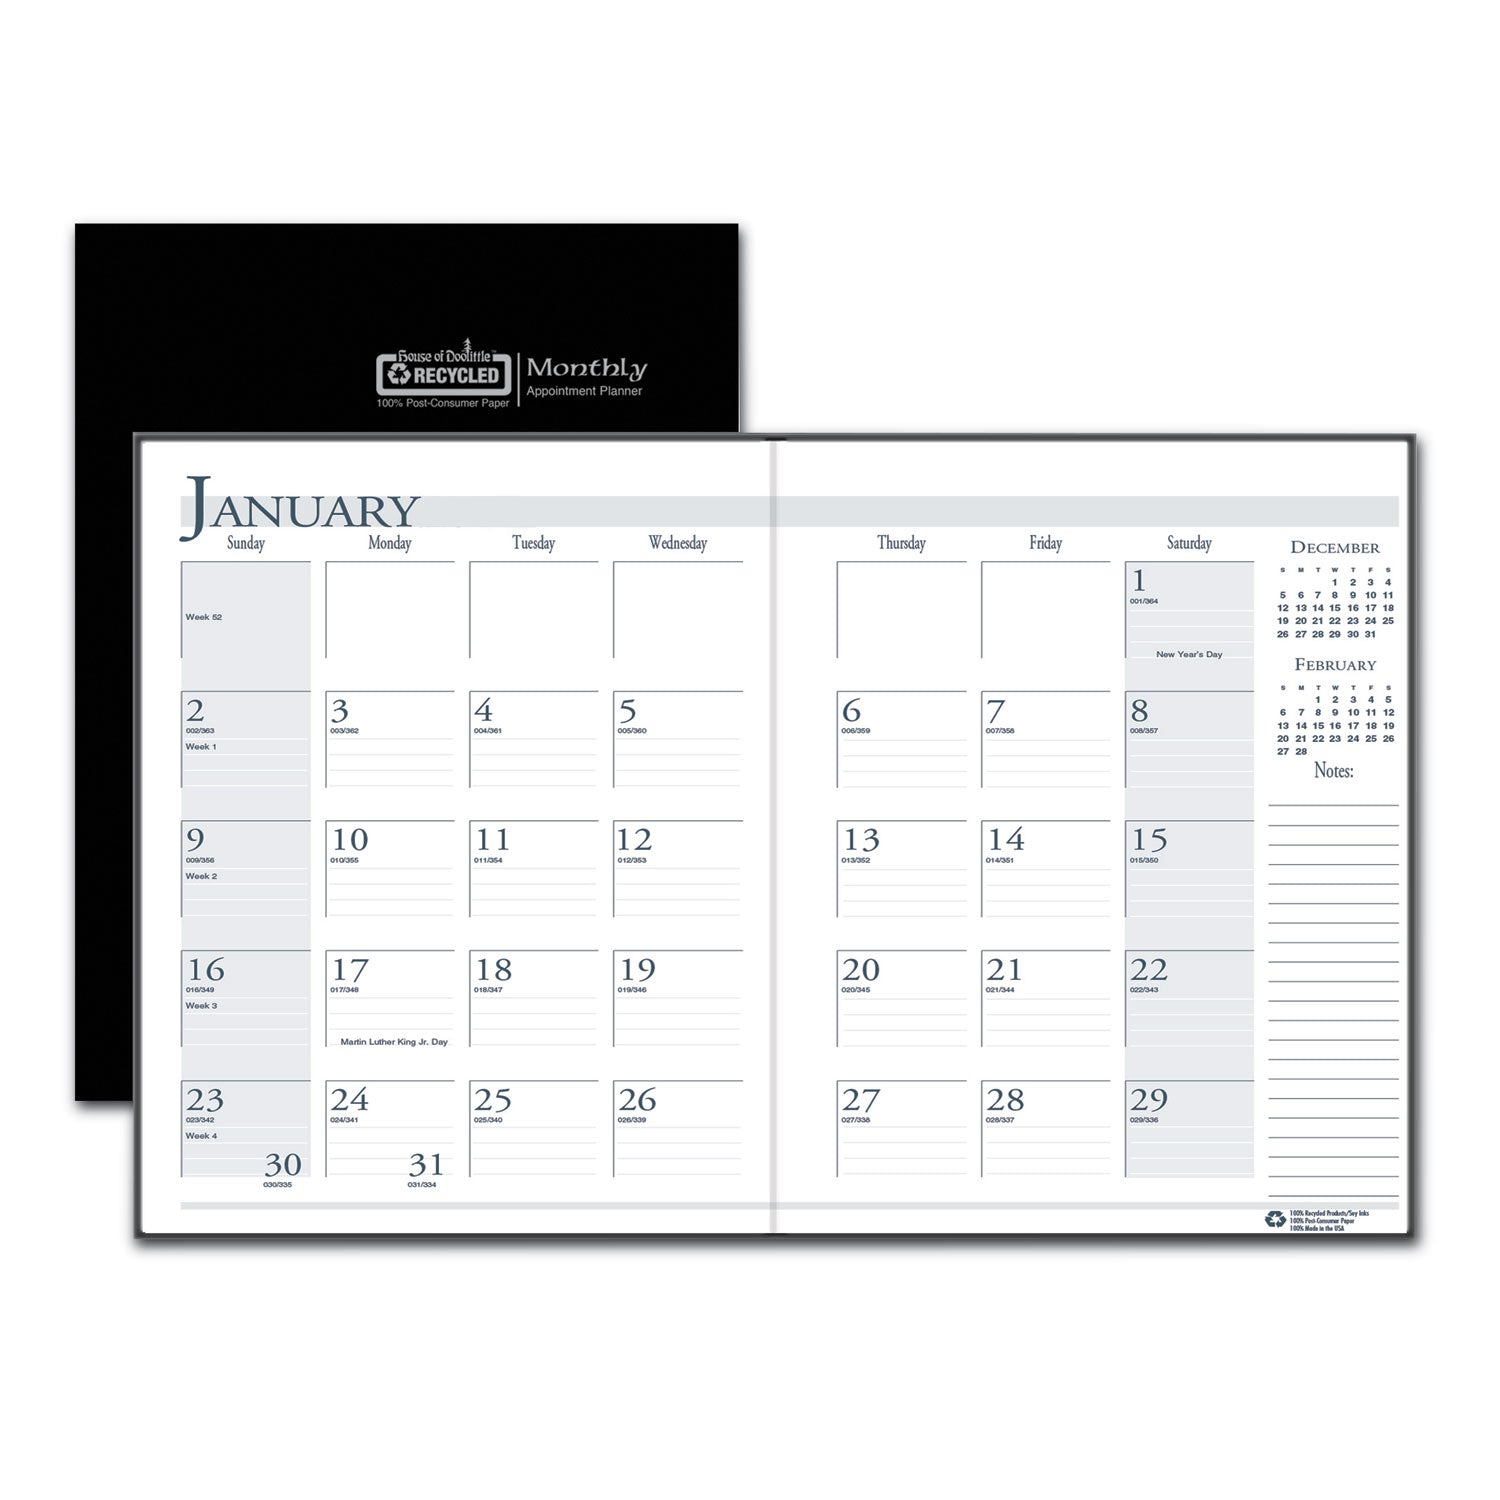 recycled-ruled-14-month-planner-with-leatherette-cover-10-x-7-black-cover-14-month-dec-to-jan-2023-to-2025_hod260602 - 1